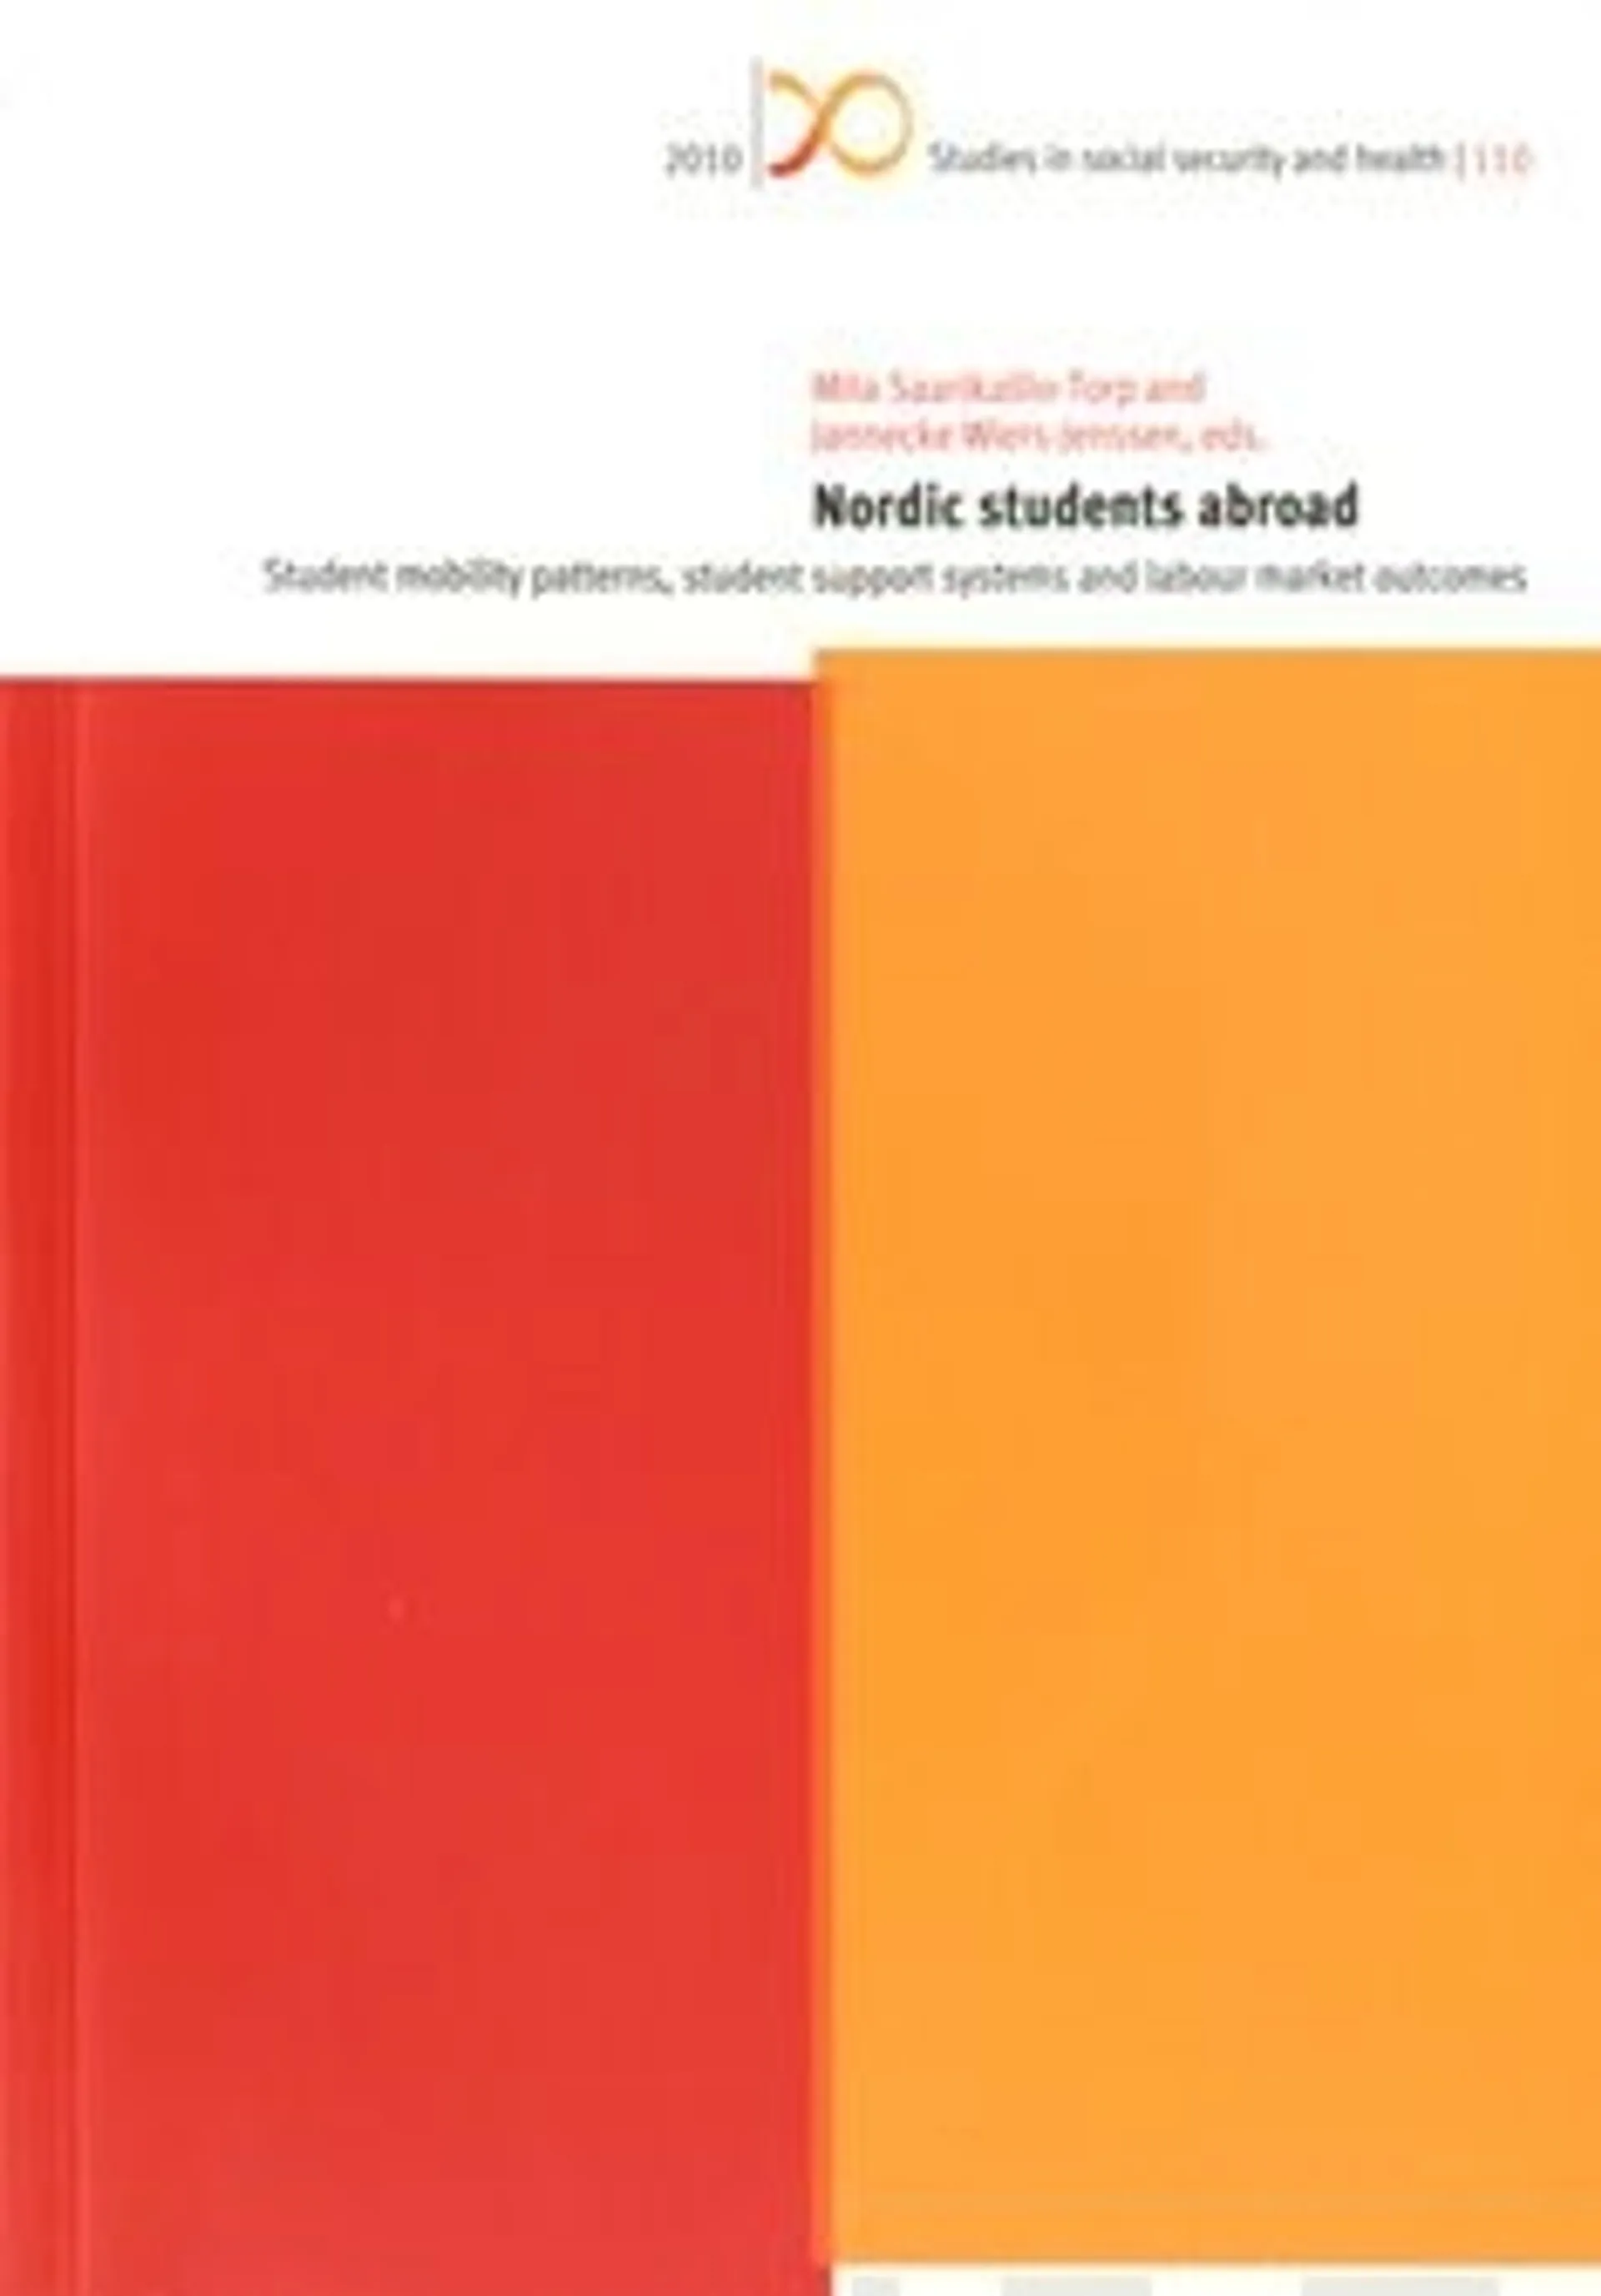 Nordic students abroad